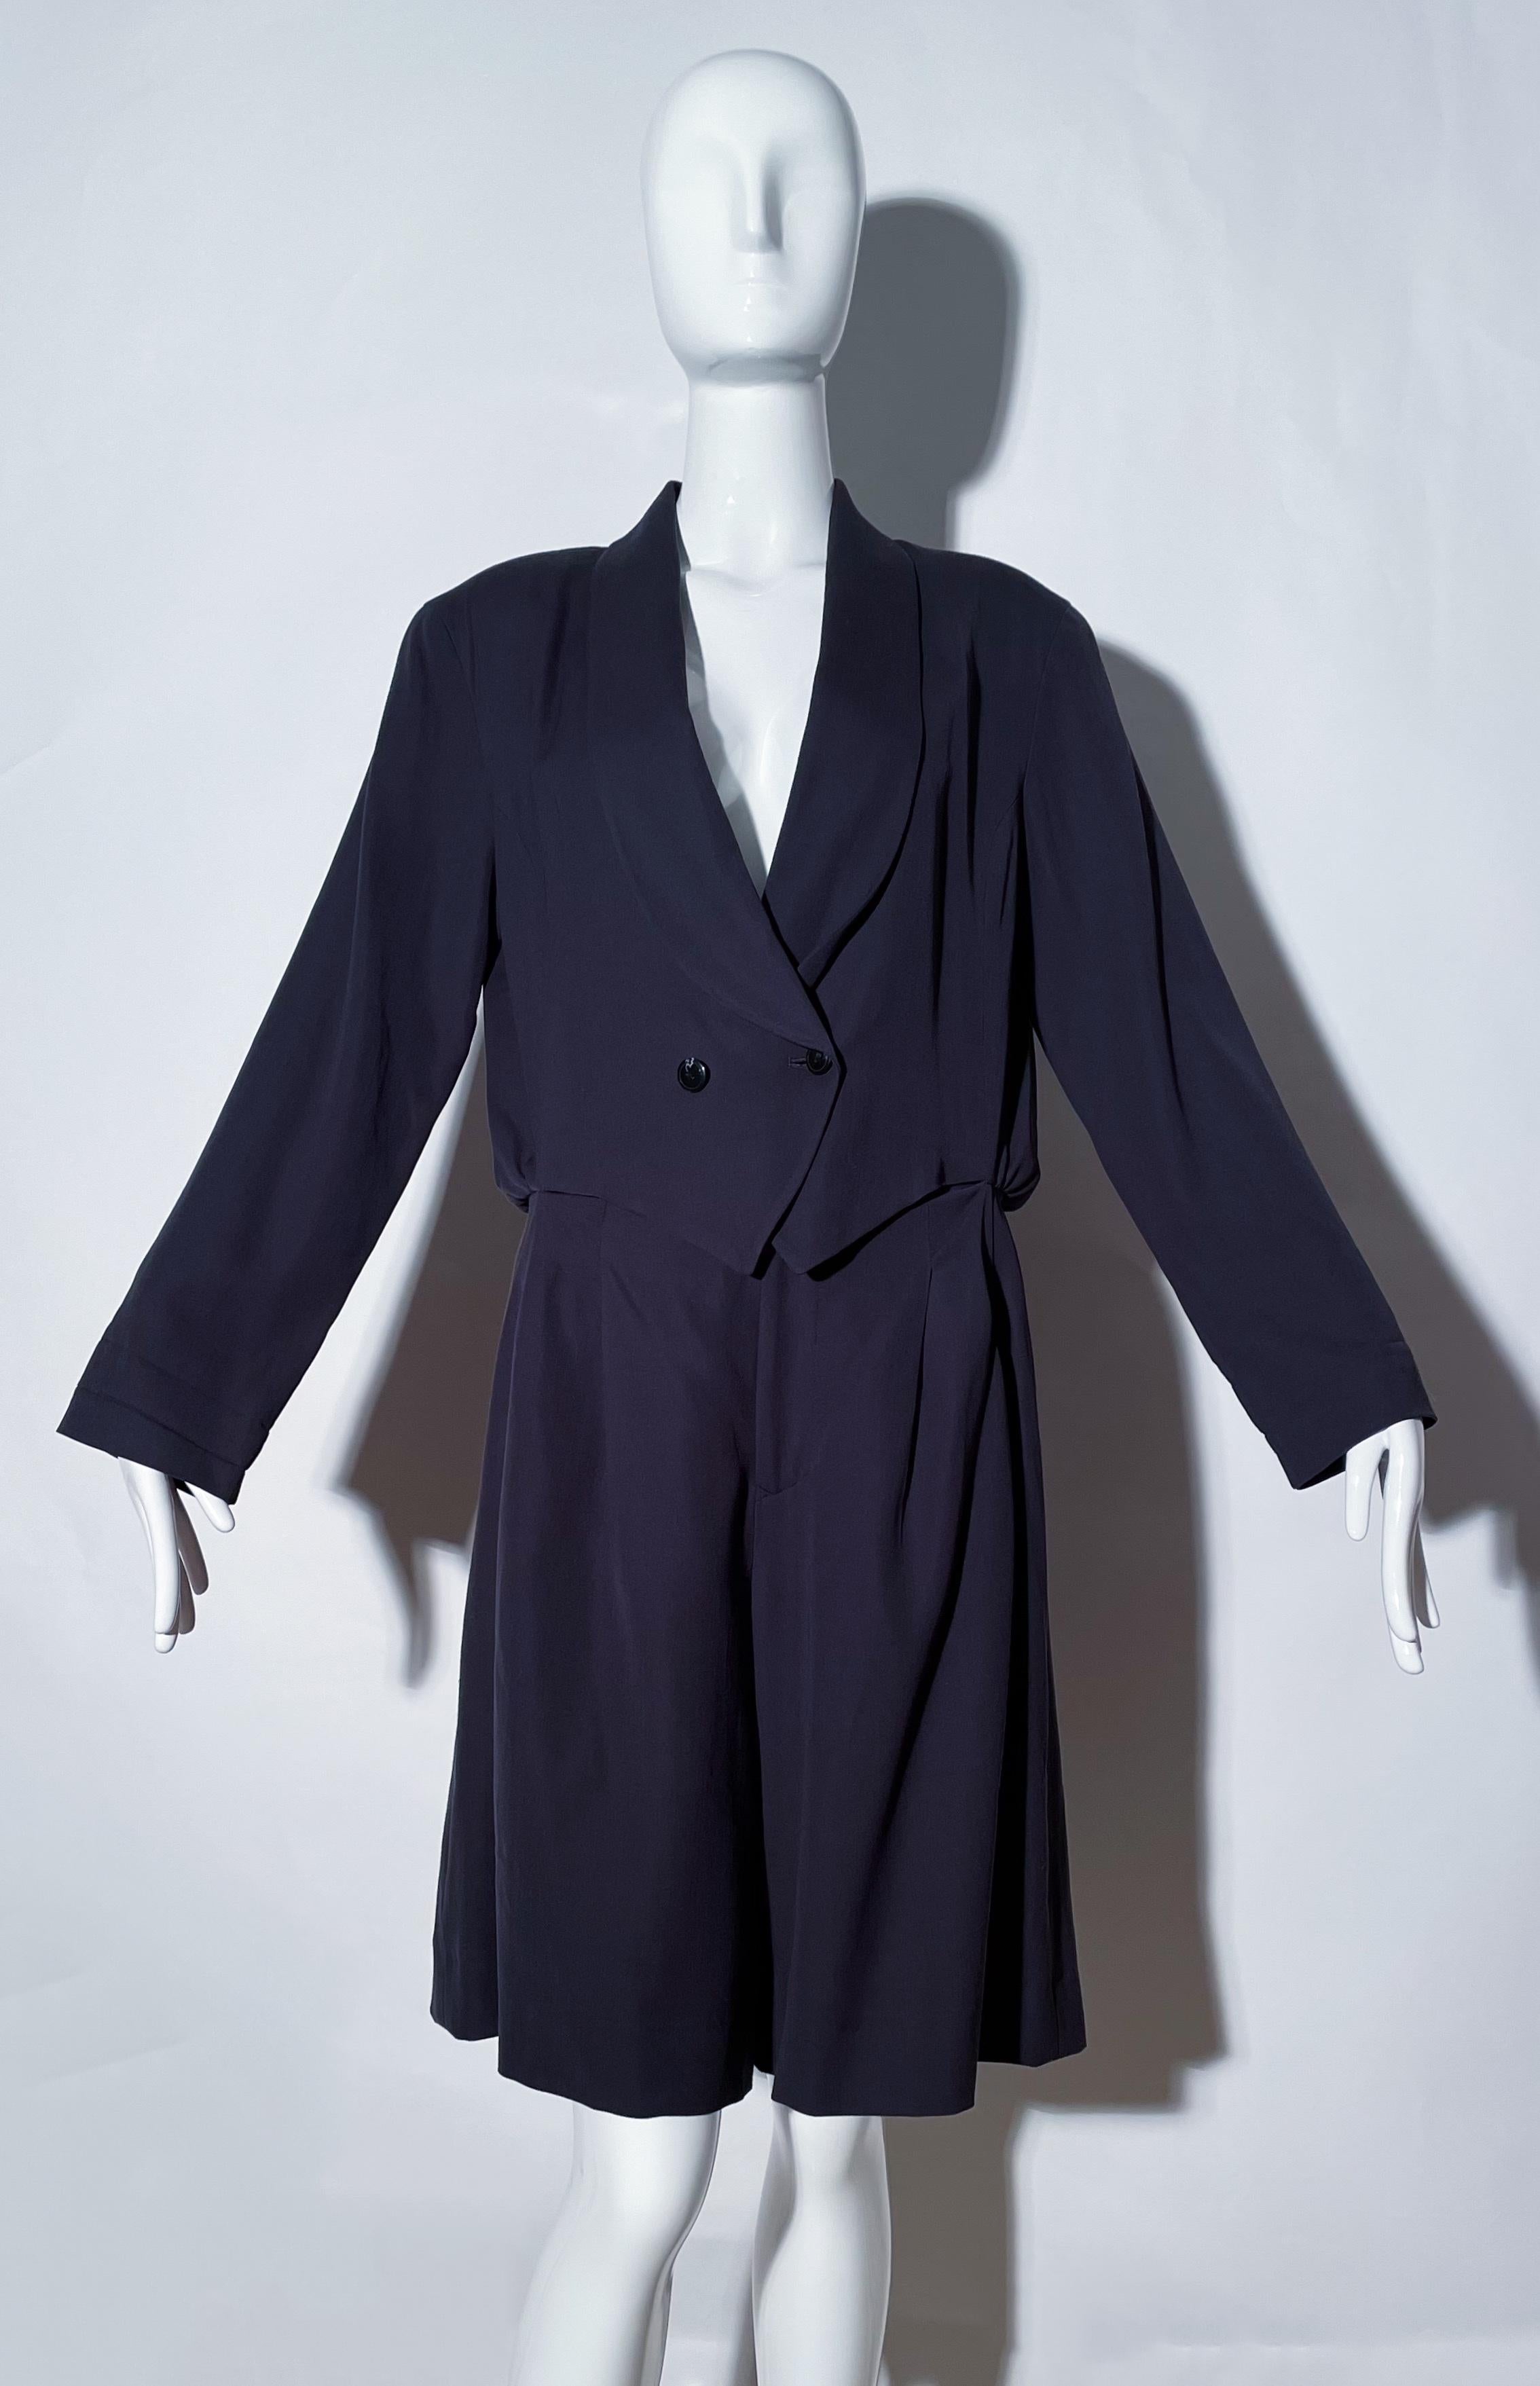 Black romper. Blazer style. Collared. Shoulder pads. Front button closures. Elastic waistband. Front pockets. Lined. Made in Japan. 
*Condition: excellent vintage condition. No visible flaws.

Measurements Taken Laying Flat (inches)—
Shoulder to